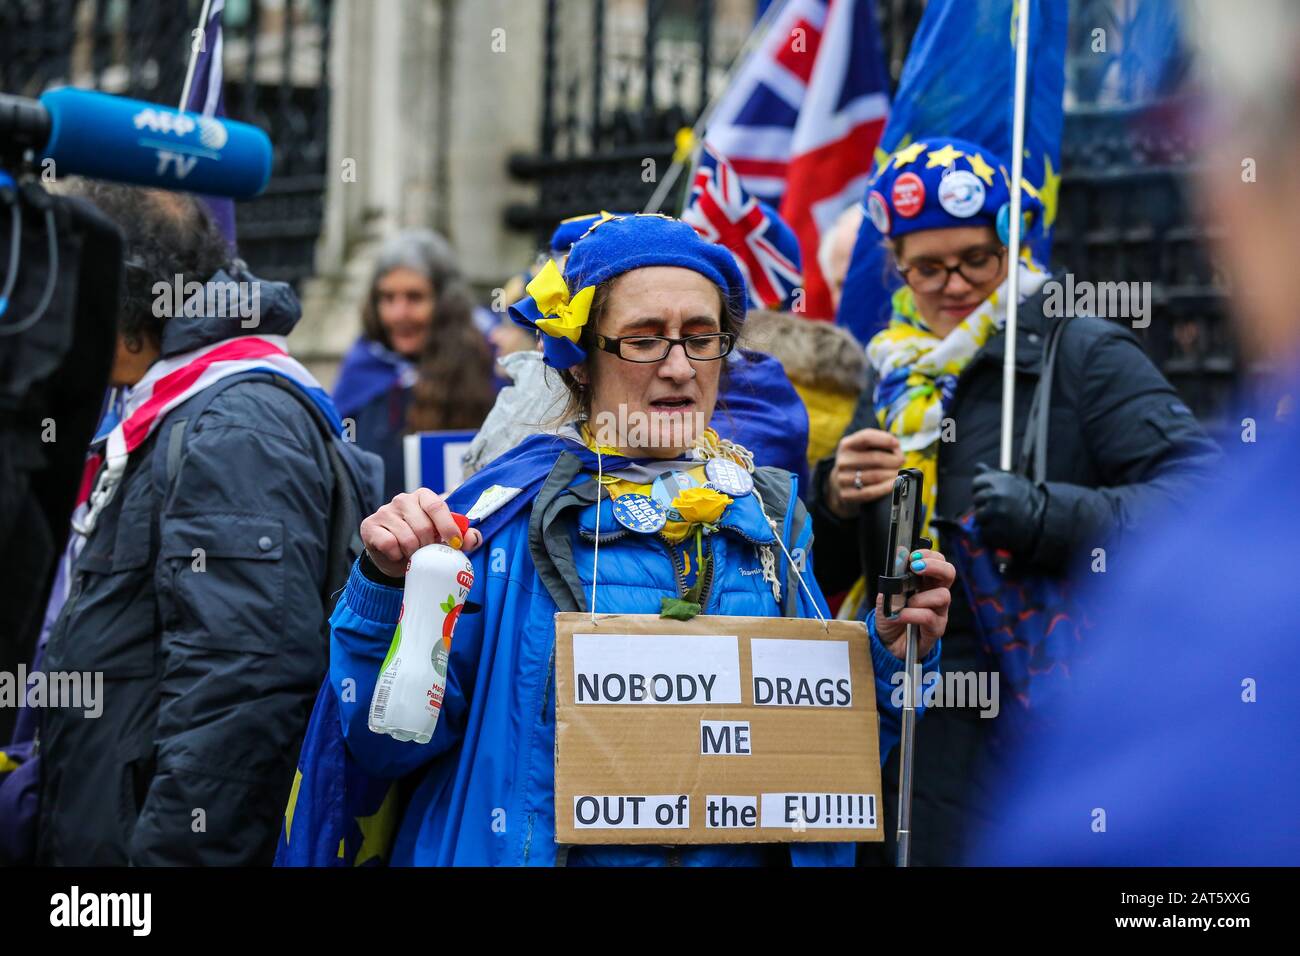 Pro-remain supporters protest outside Houses of Parliament on the eve of Brexit Day.Pro-remain supporters with EU flags protest outside Houses of Parliament on the eve of Brexit Day. Britain will officially leave the European Union at 11pm (GMT) on 31 January 2020 and will cease to be a state member. Under the terms of the Withdrawal Agreement, UK will enter a transitional period and will abide by EU rules despite not being a member. Stock Photo